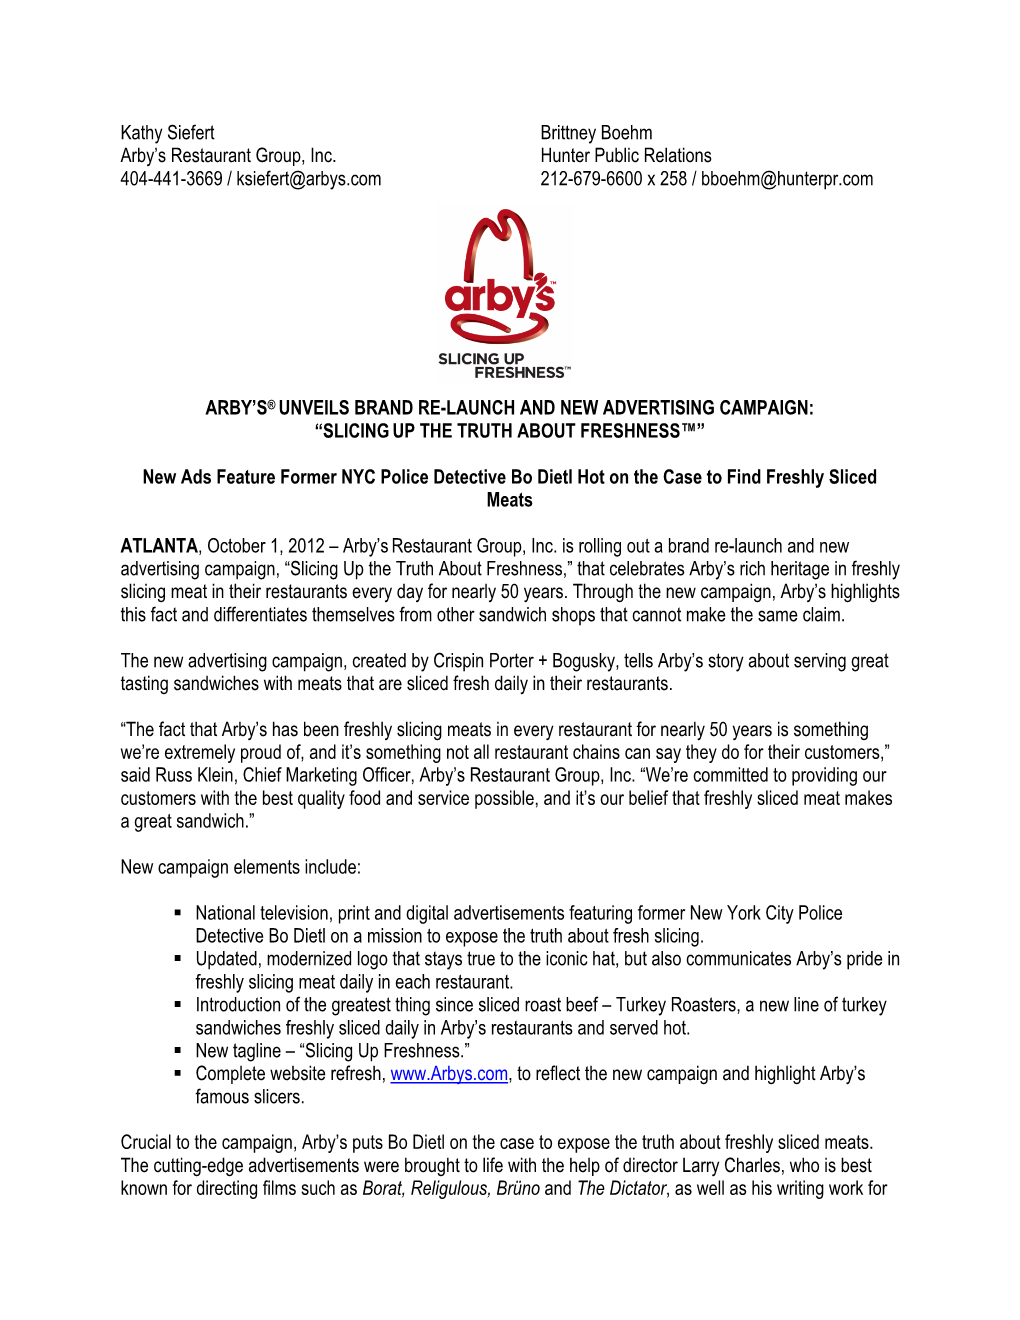 Arby's Brand Re-Launch Press Release FINAL